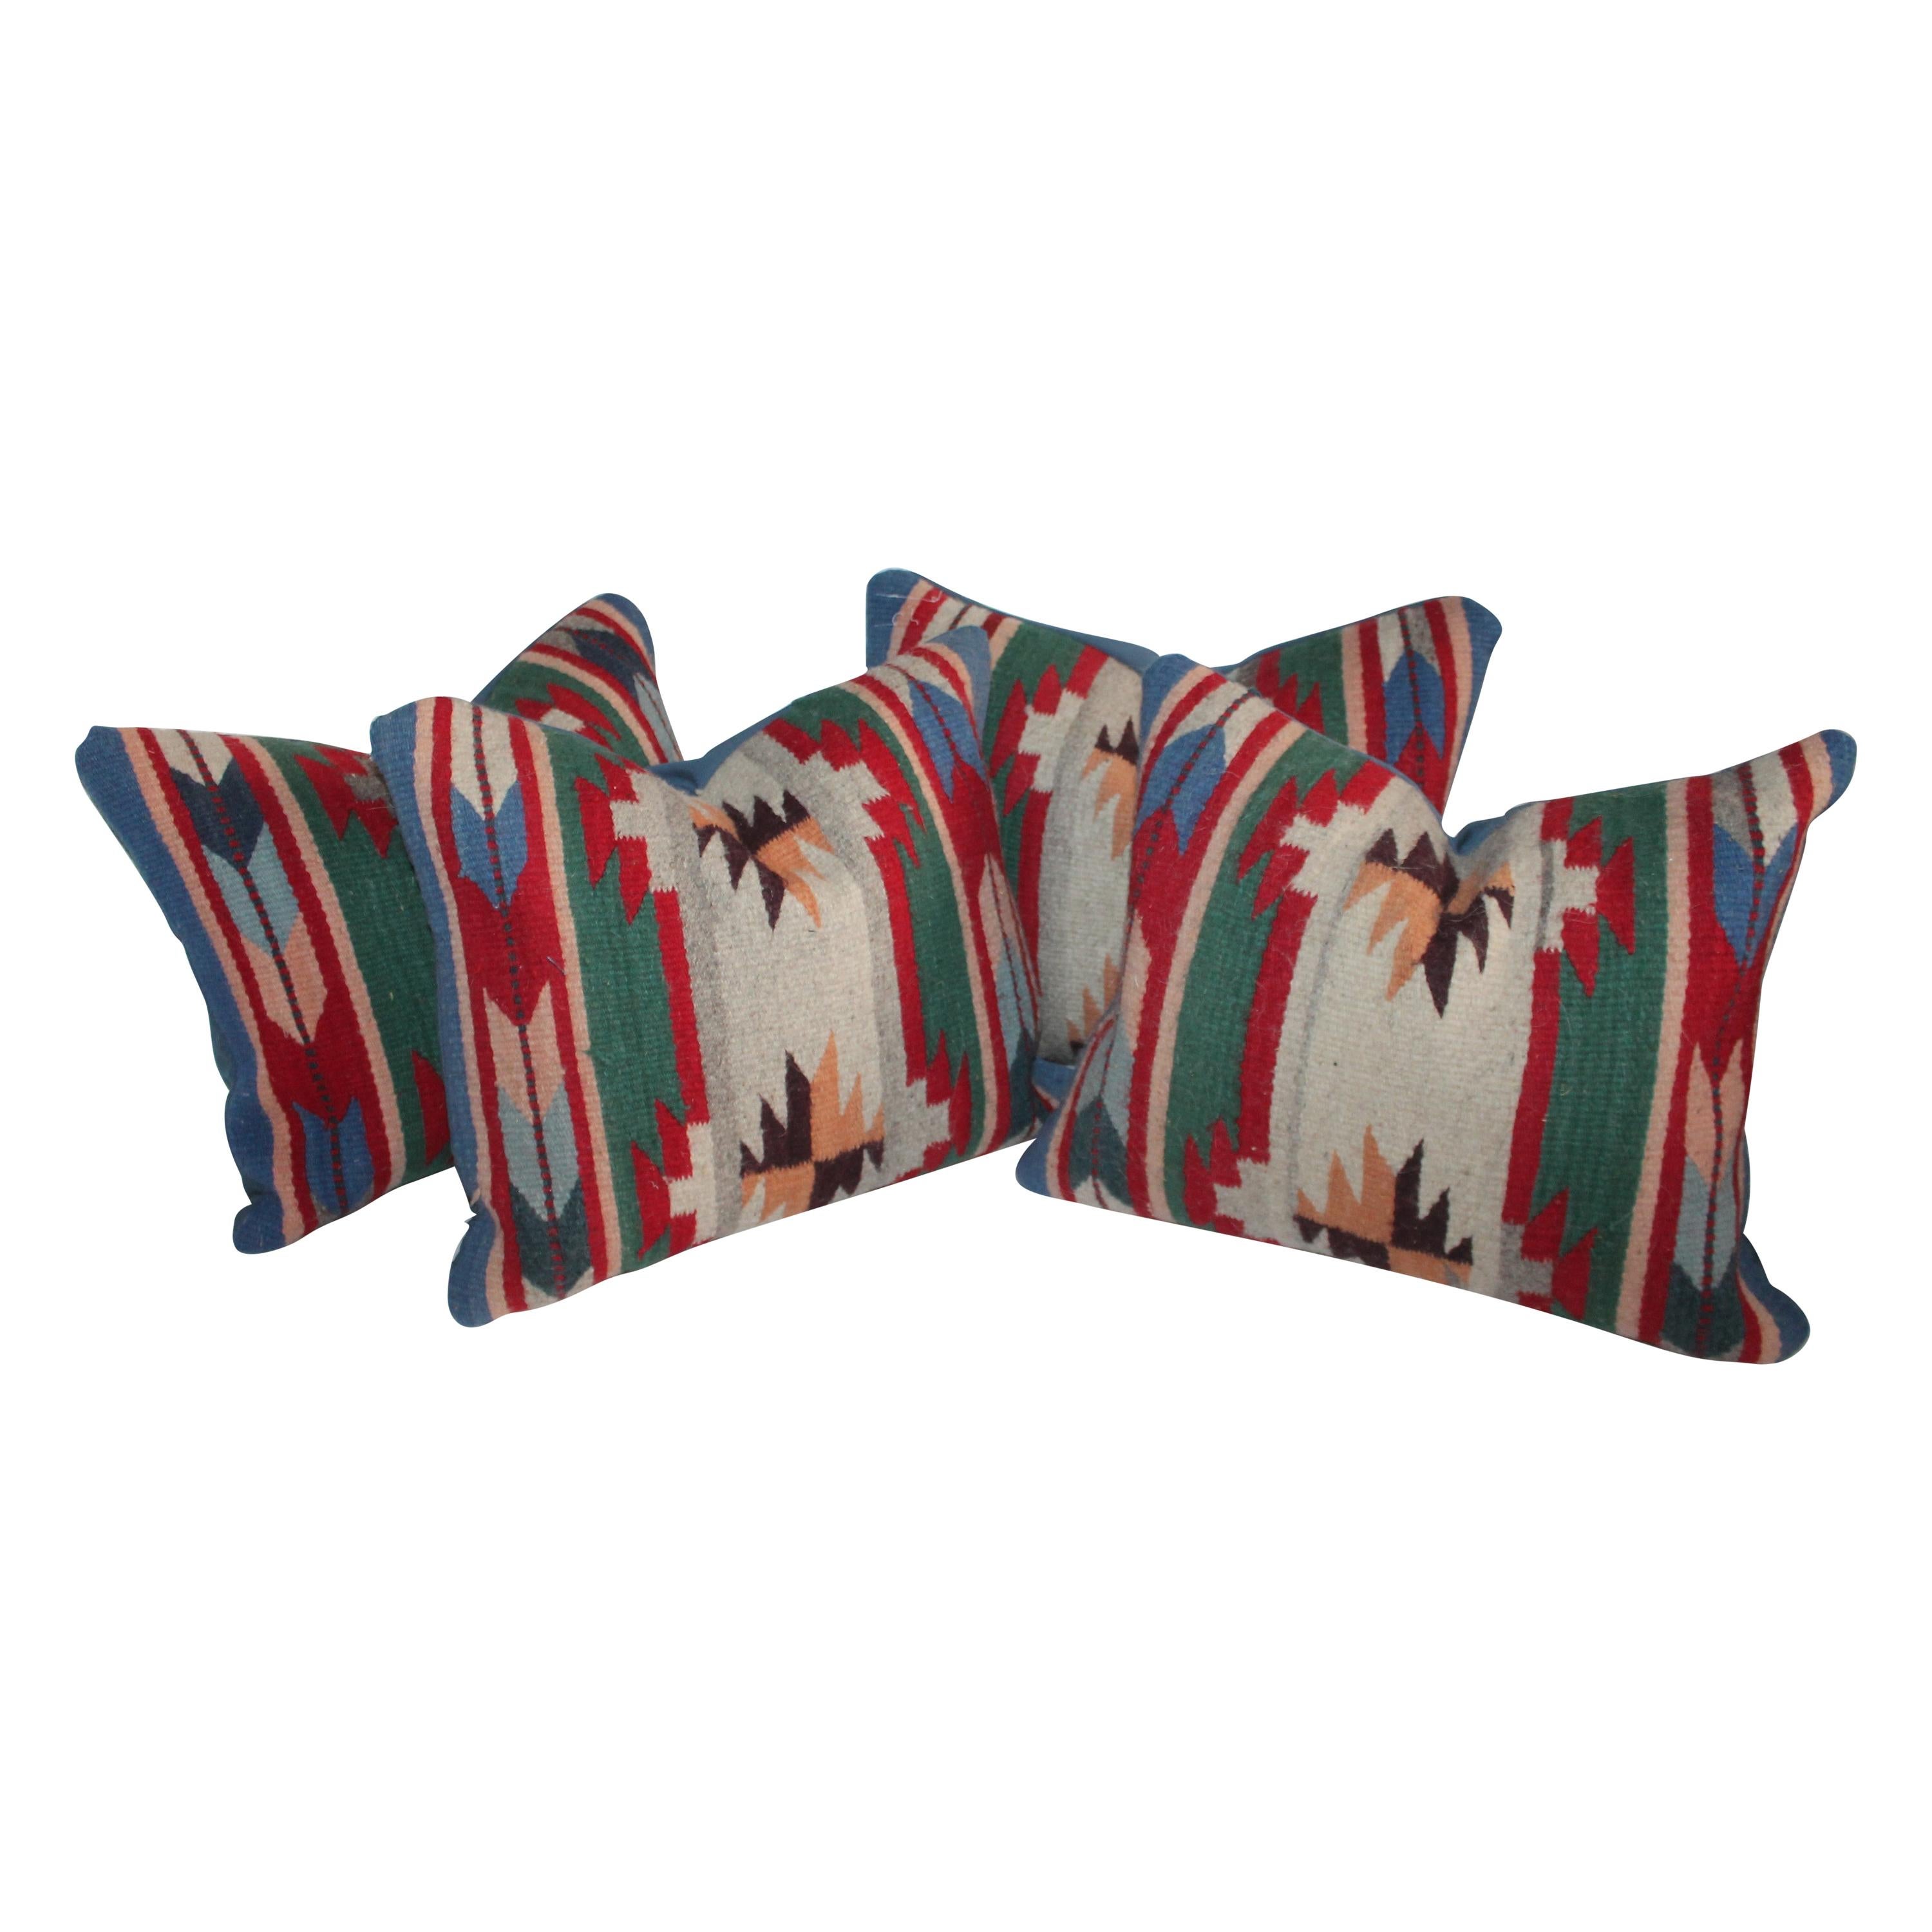 Collection of Mexican or American Indian Weaving Pillows, Two Pairs